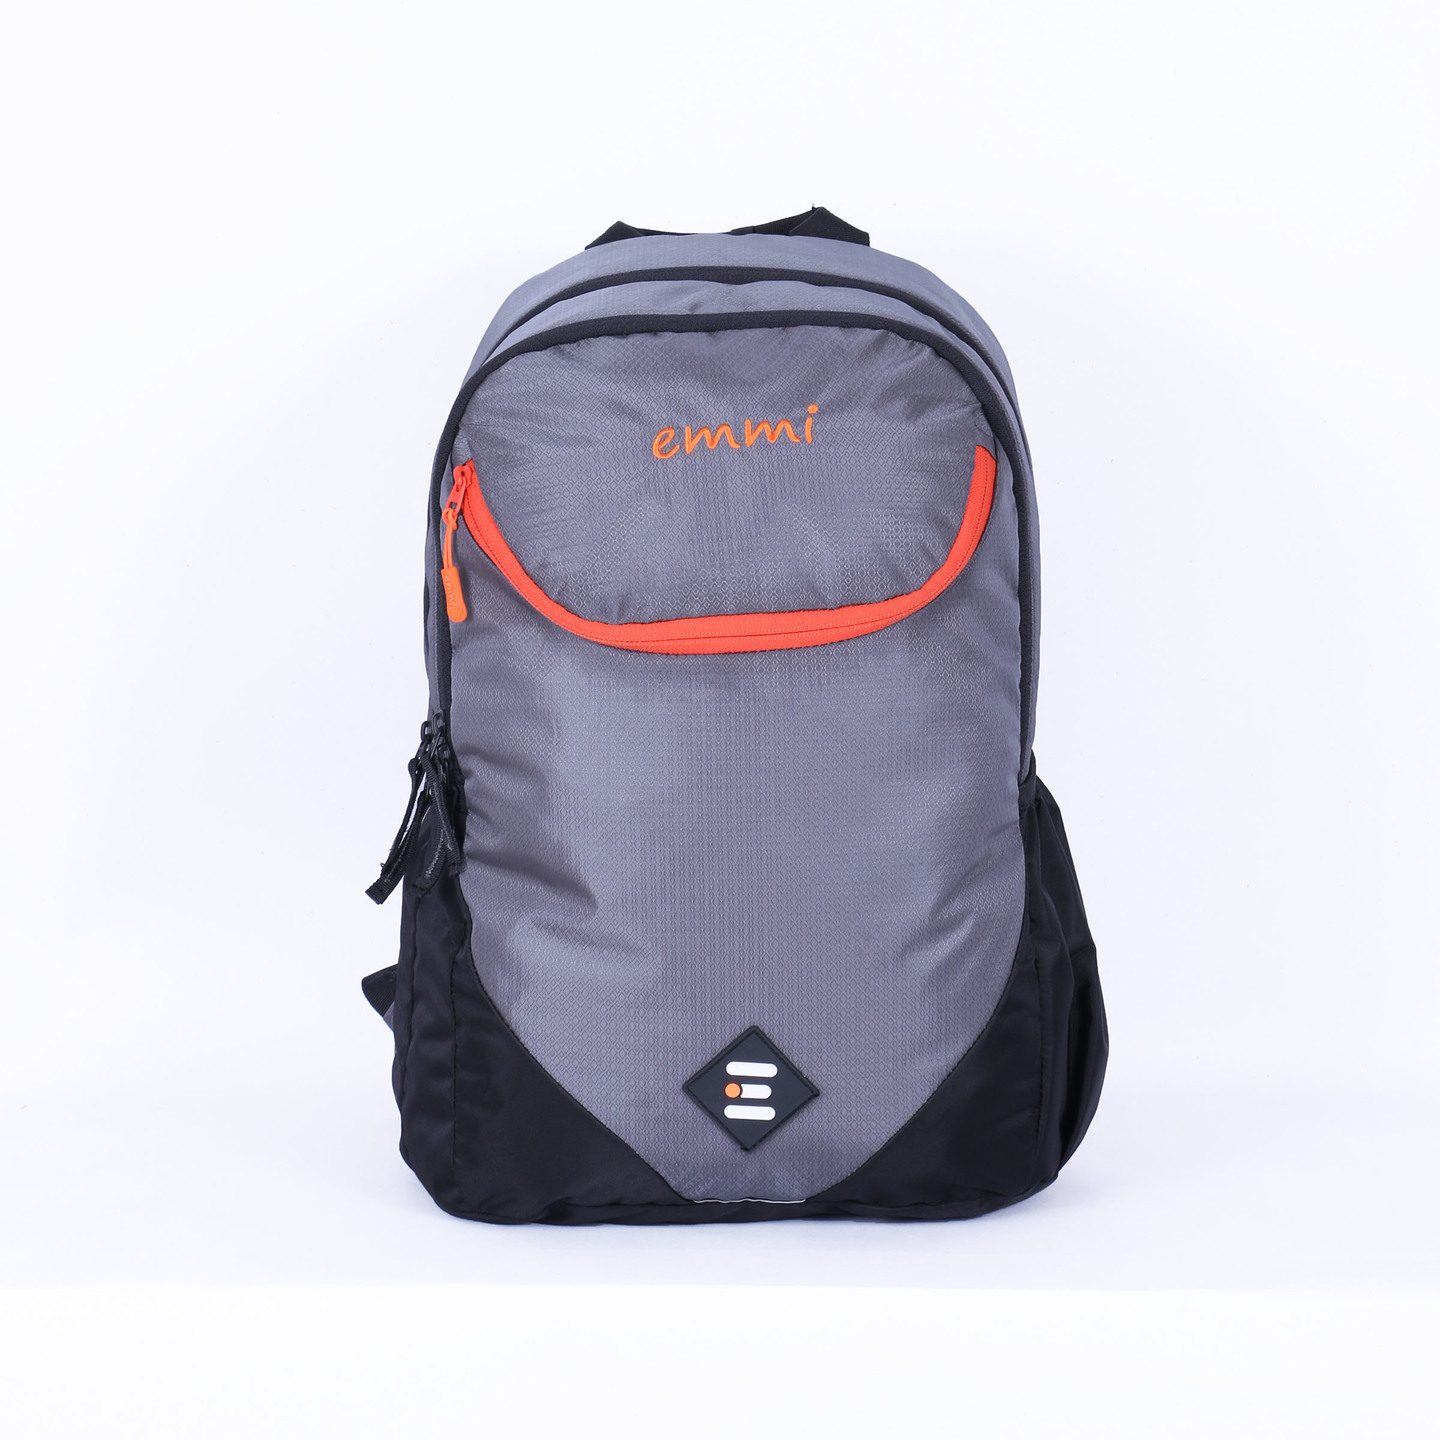 Laptop Backpack – In partner with PromoDesign